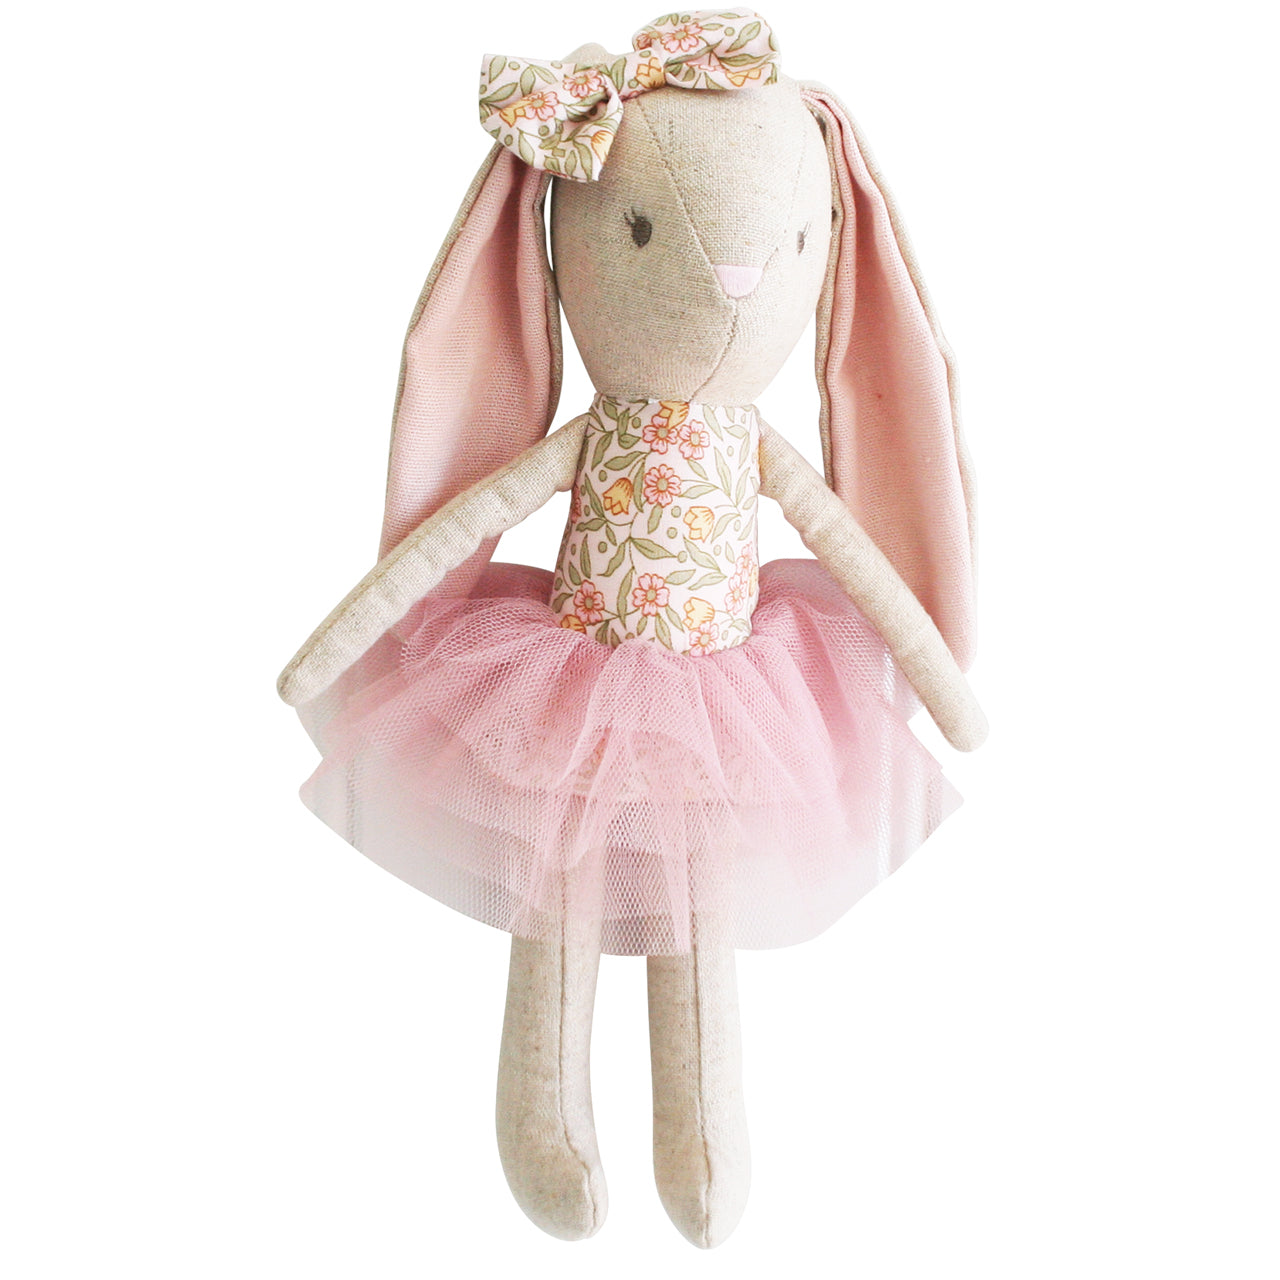 Alimrose - Baby Bunny 26cm - Blossom Lily Pink